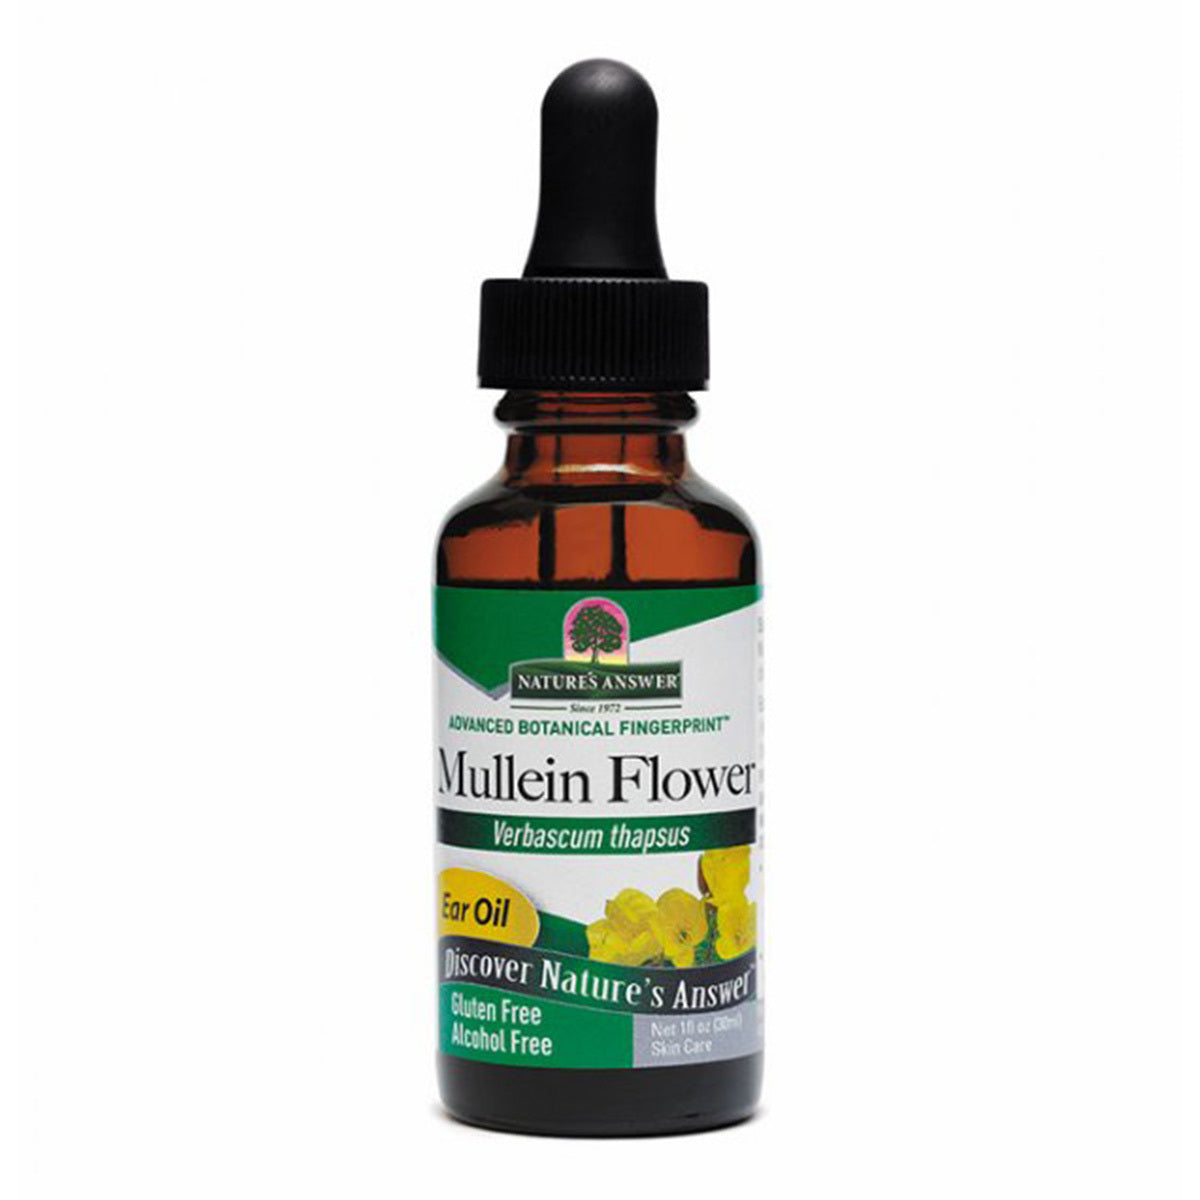 Primary image of Mullein Flower Oil